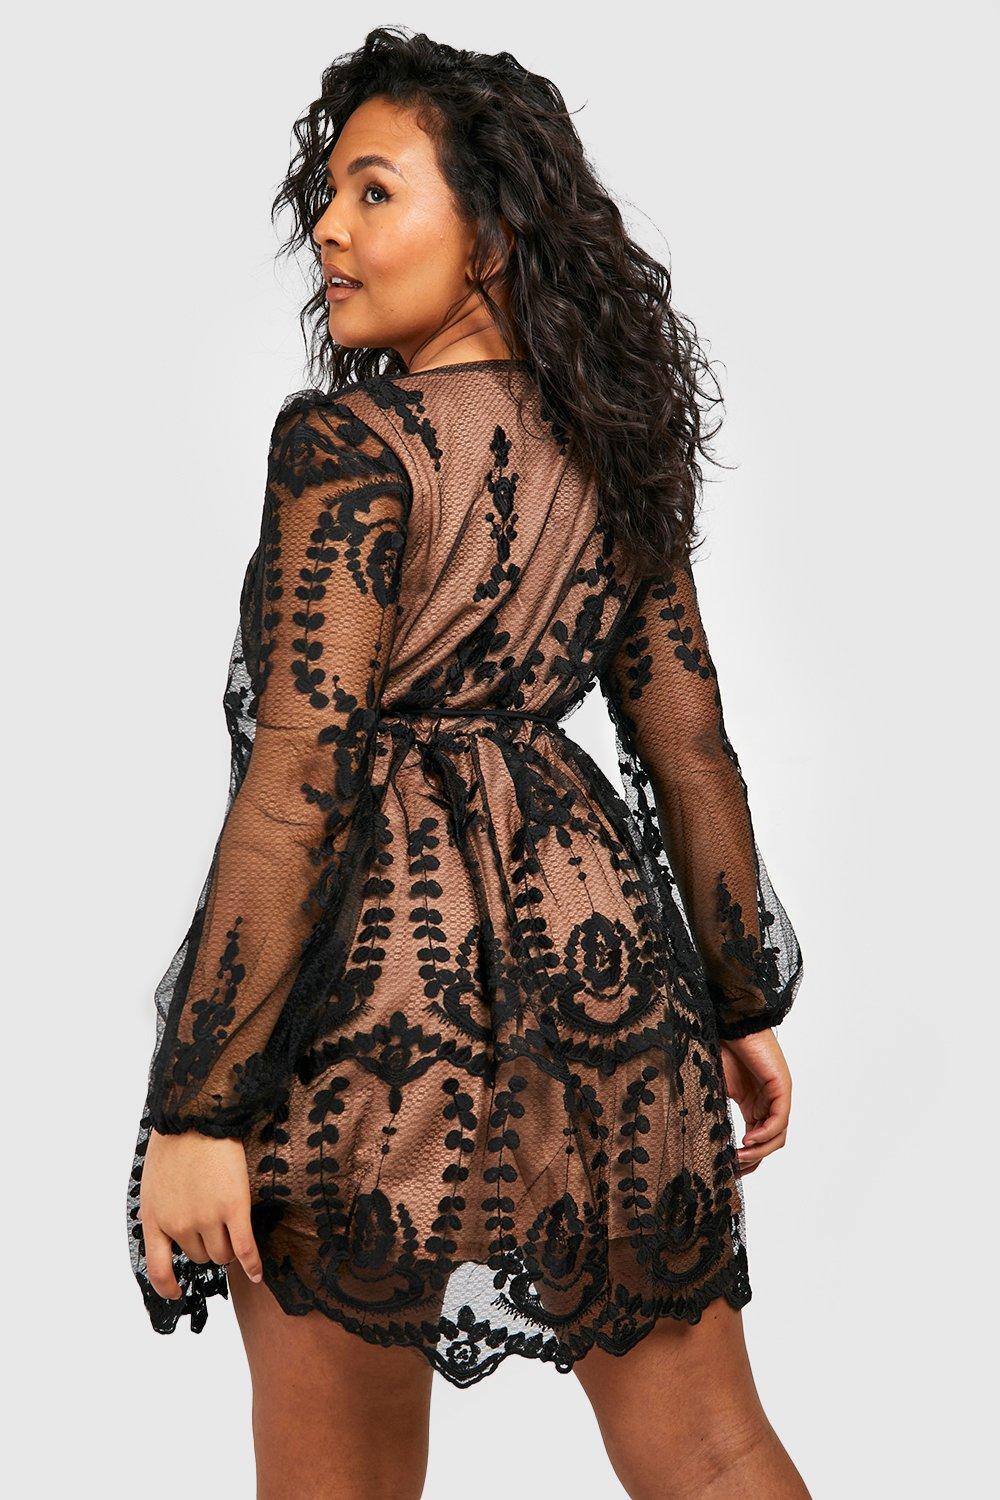 Boohoo Boutique Lace Plunge Skater Dress in Black | Lyst